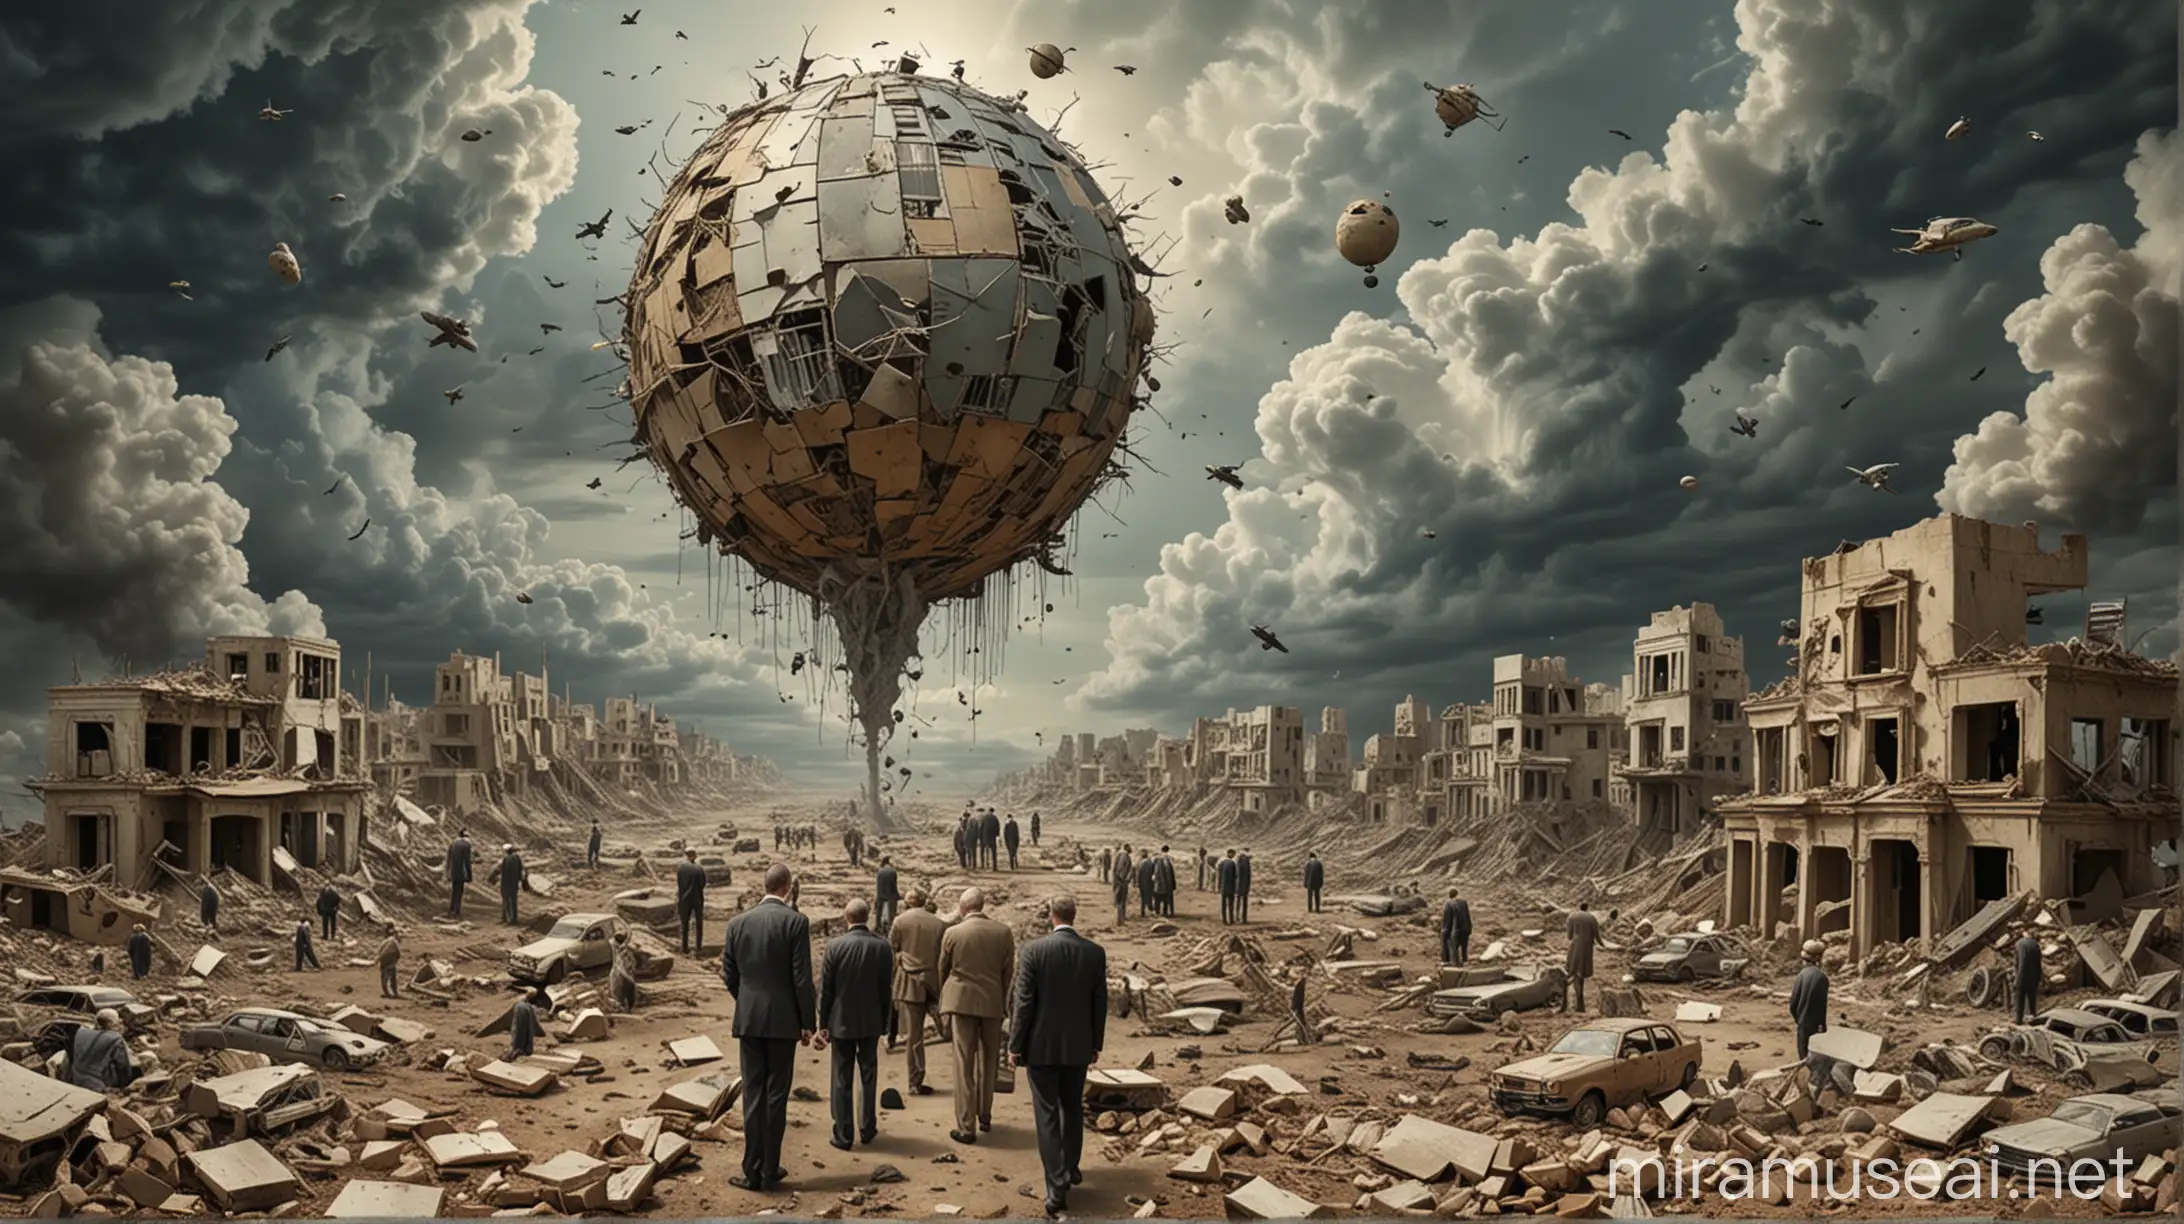 surrealist artwork of the collapse of neoliberal world order from war, climate change, focus on profit.